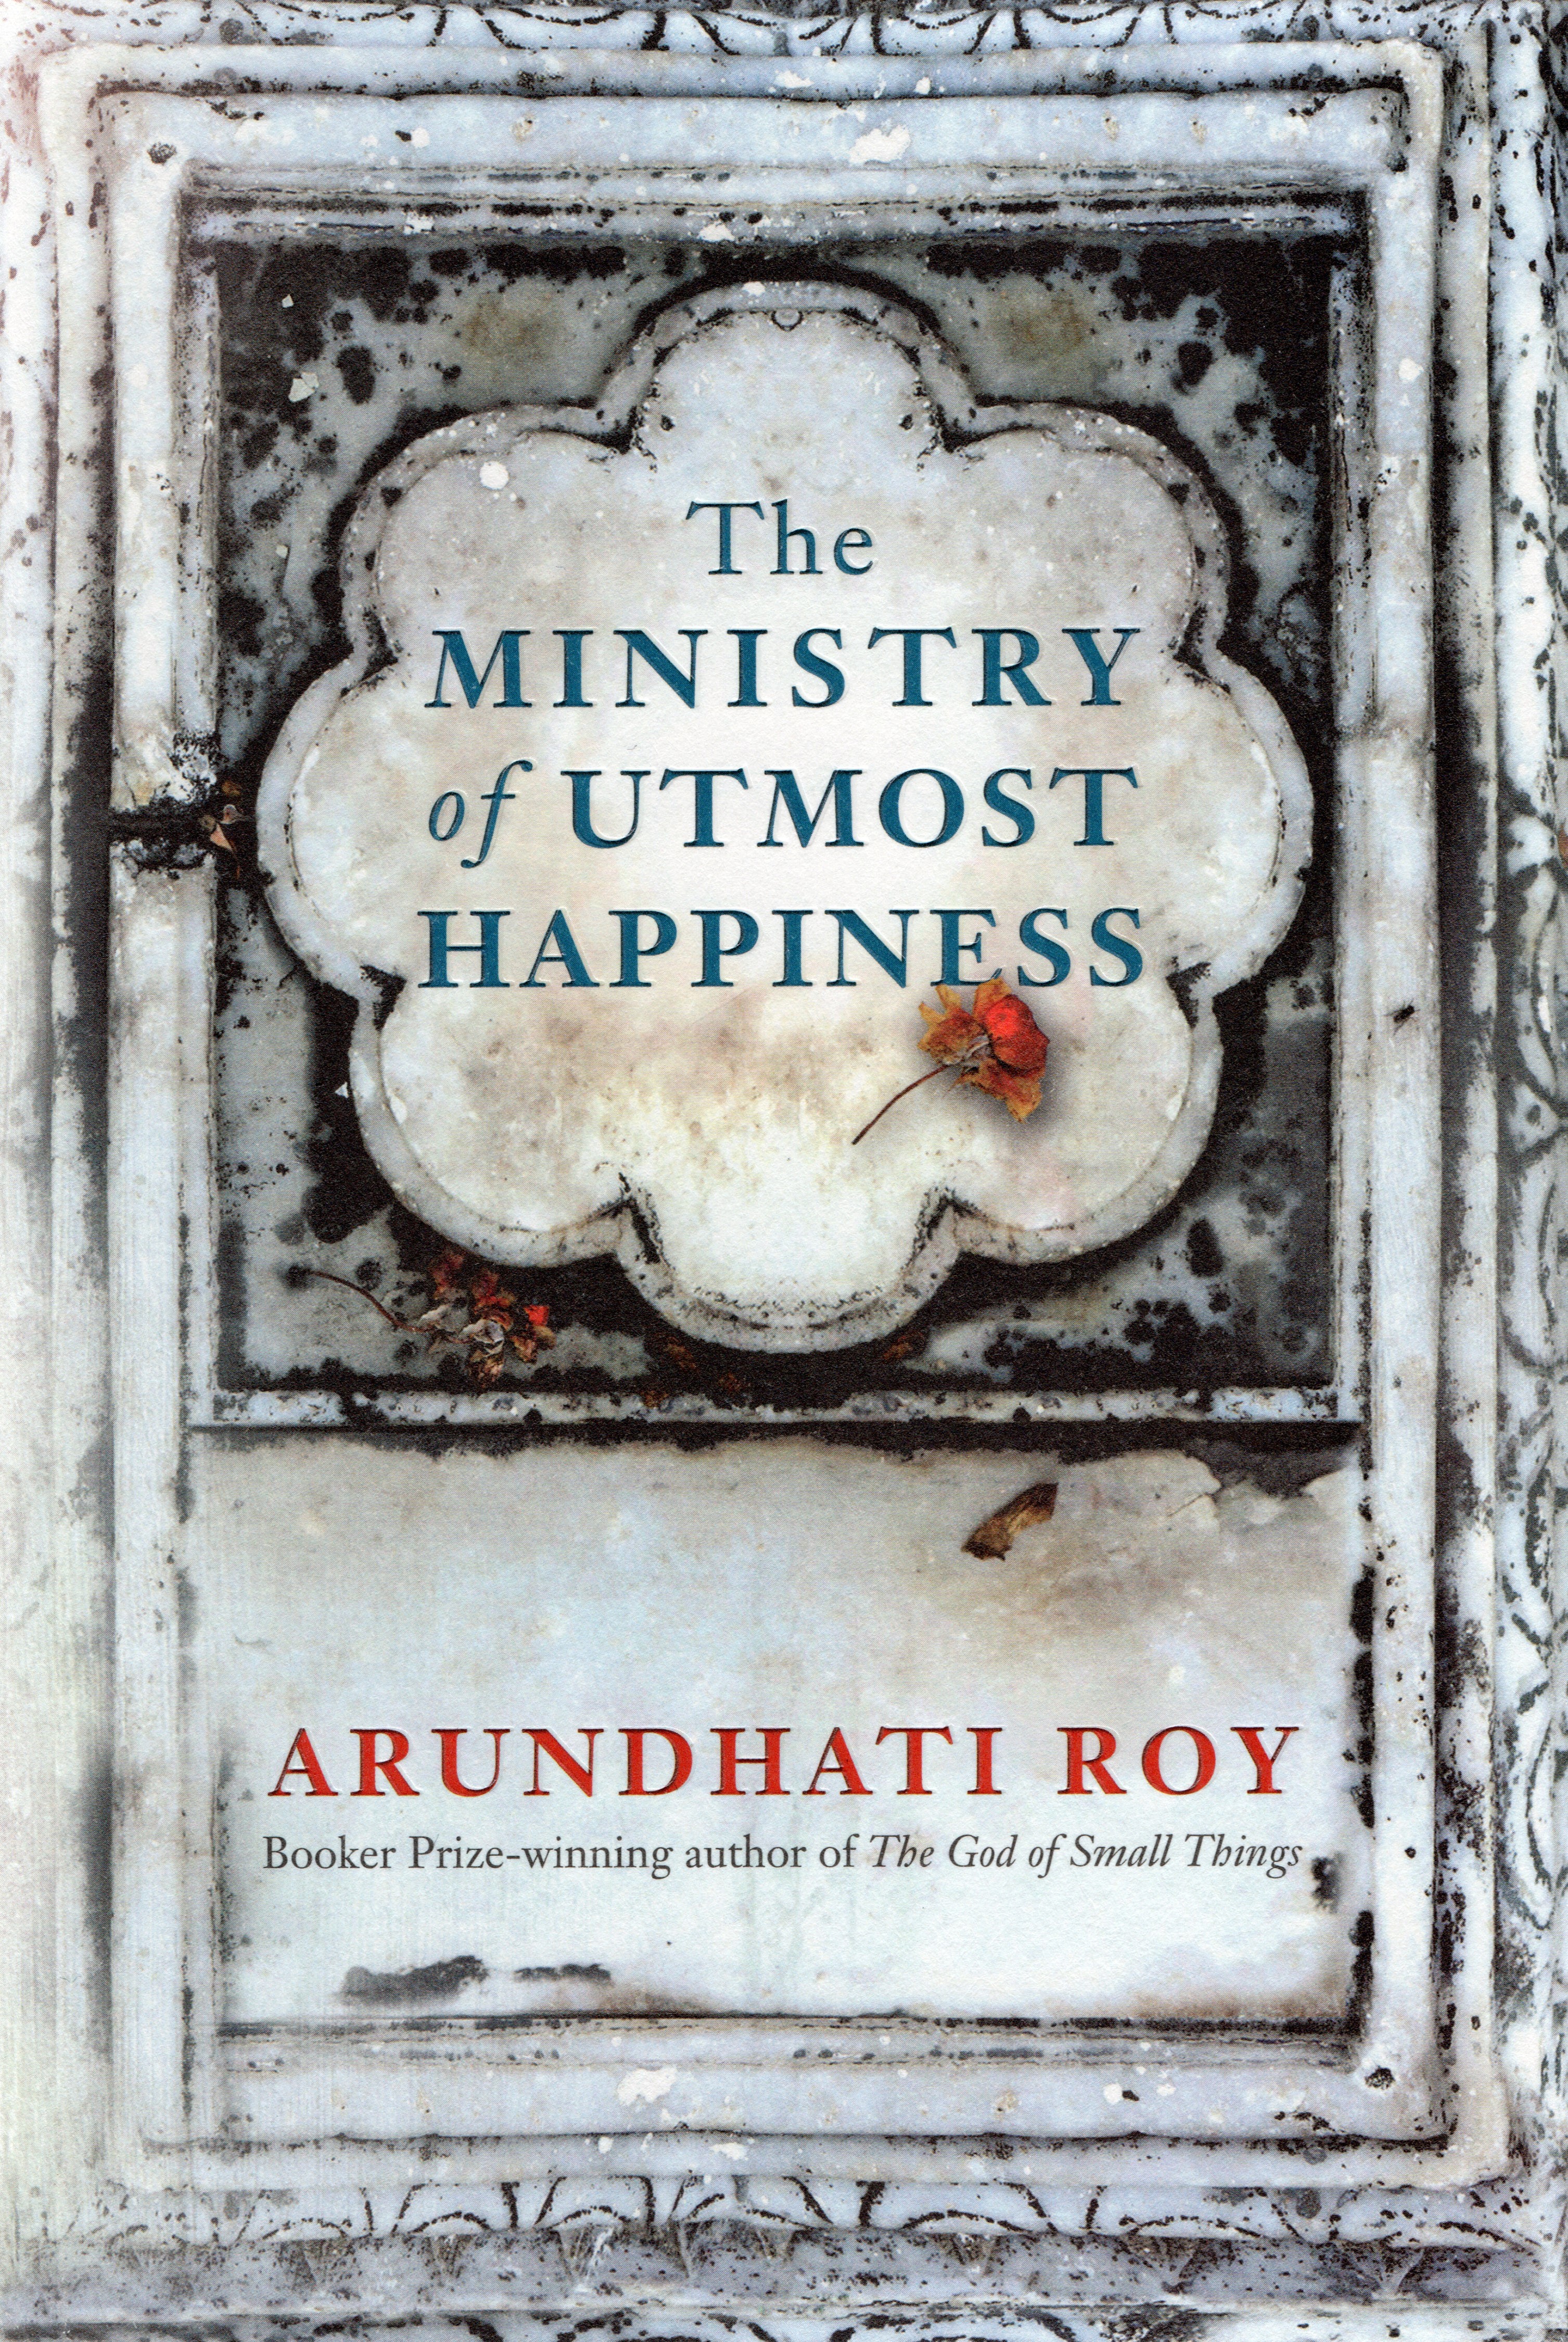 The Ministry of Utmost Happiness by Arundhati Roy (Women's Prize For Fiction)